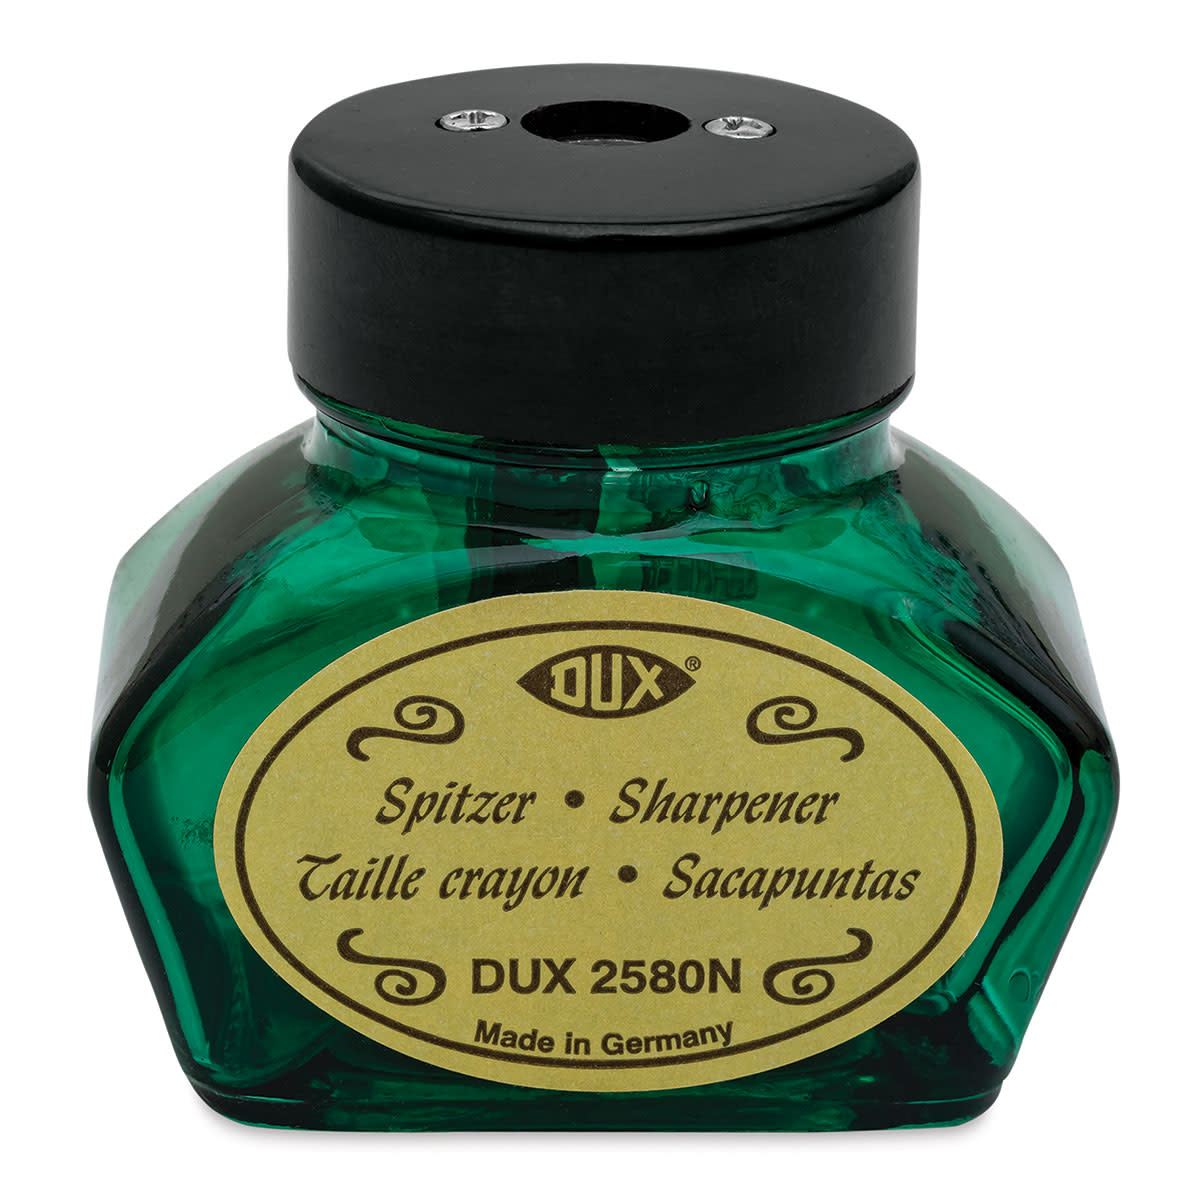 DUX Inkwell-Style Pencil Sharpener / Green